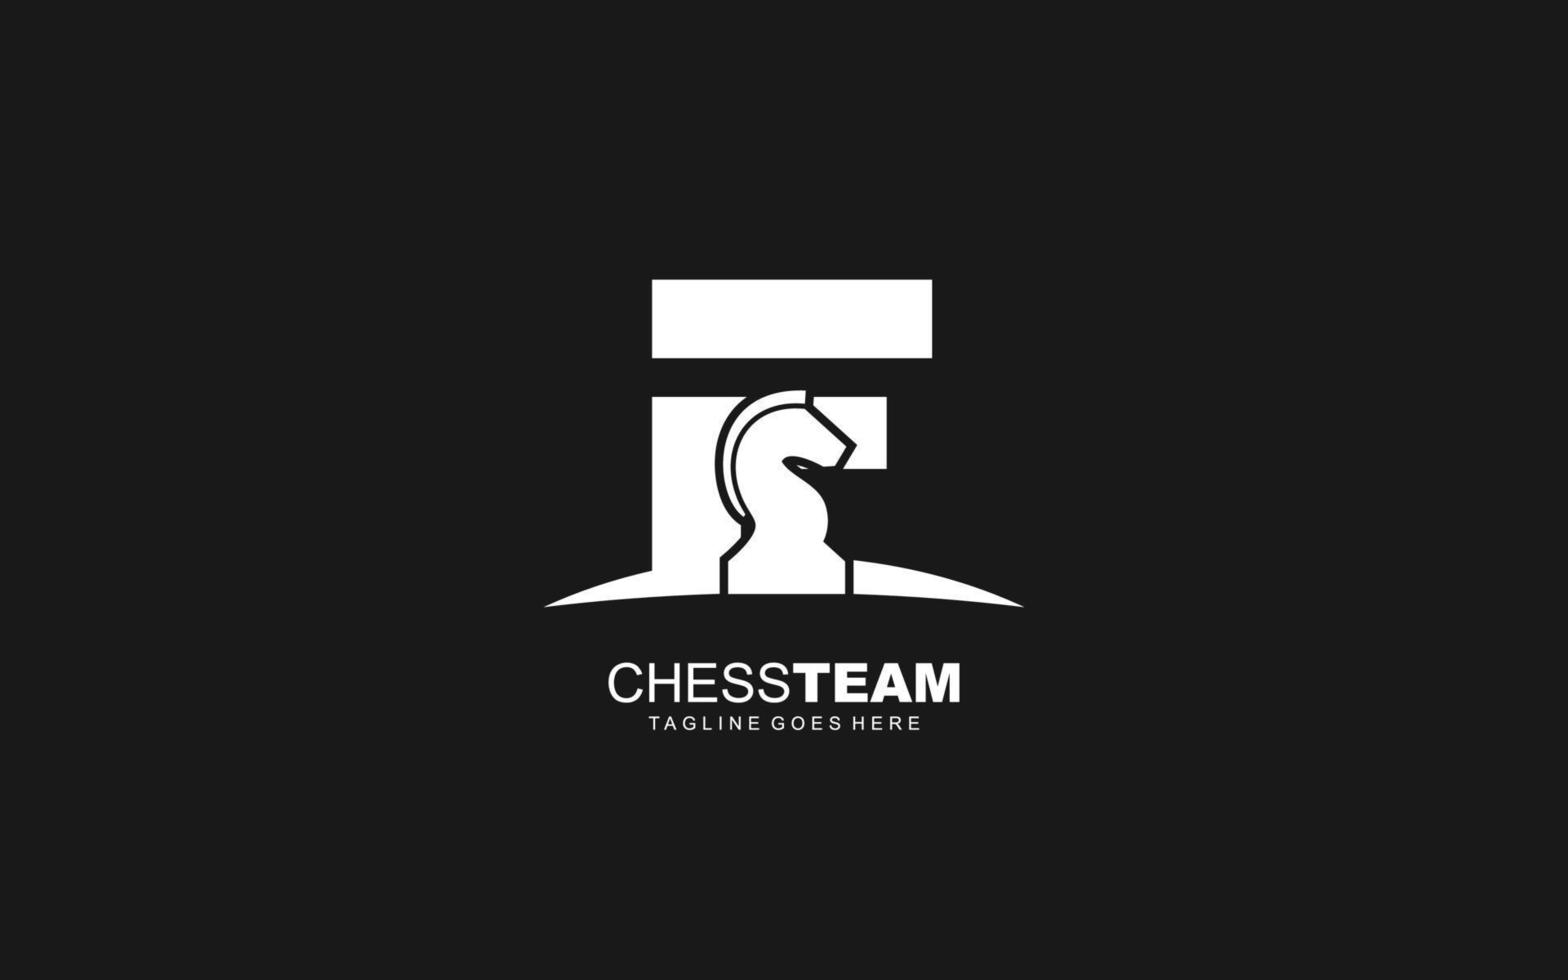 F logo CHESS for branding company. HORSE template vector illustration for your brand.